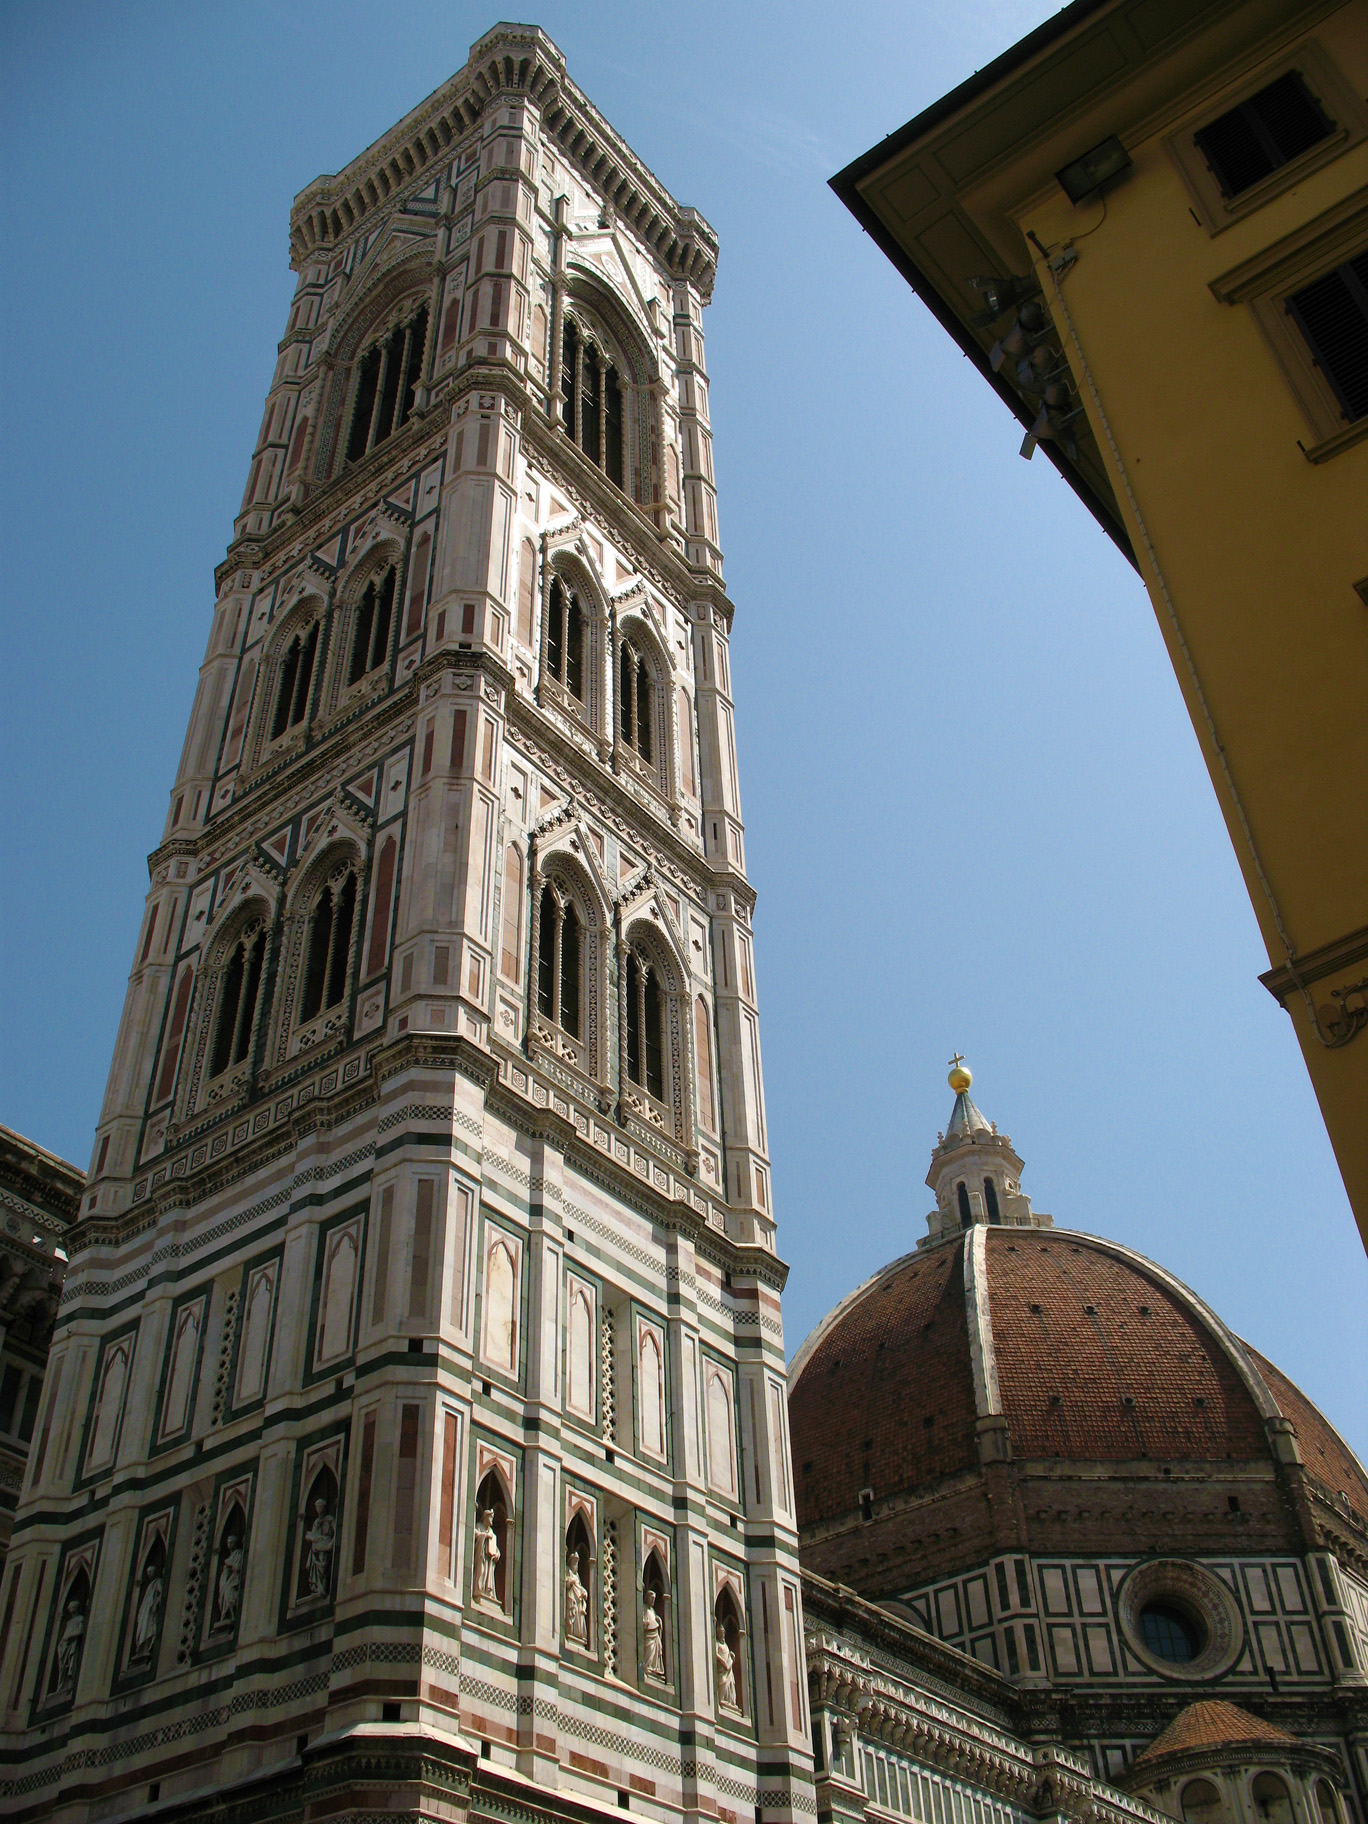 Giotto's campanile and Brunelleschi's dome, decorating the sky.